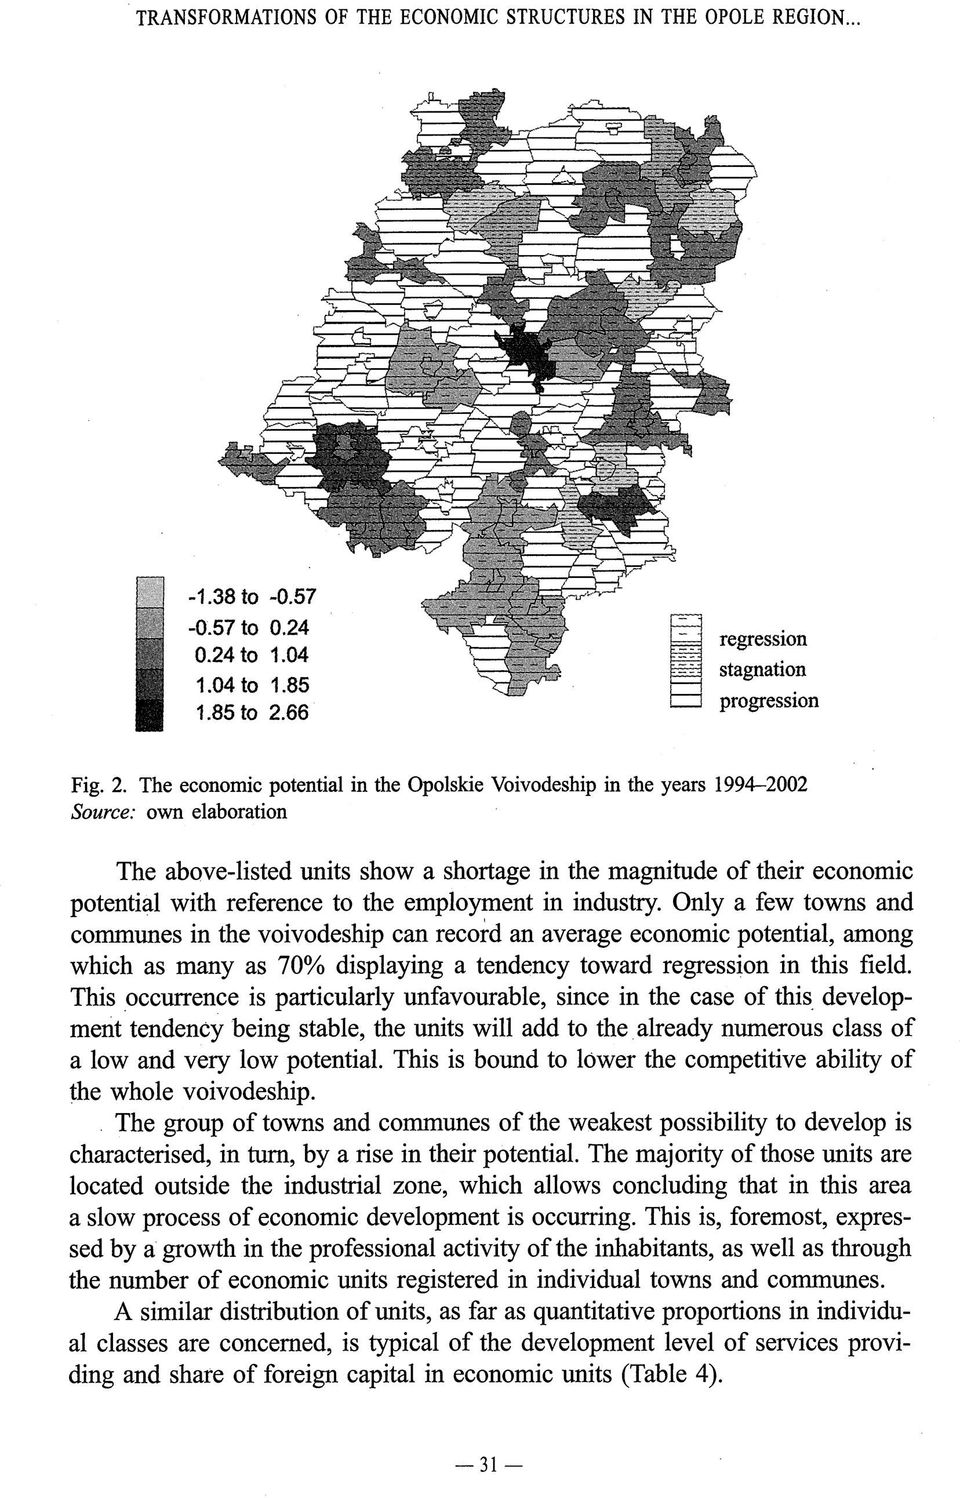 the employment in industry. Only a few towns and communes in the voivodeship can record an average economic potential, among which as many as 70% displaying a tendency toward regression in this field.